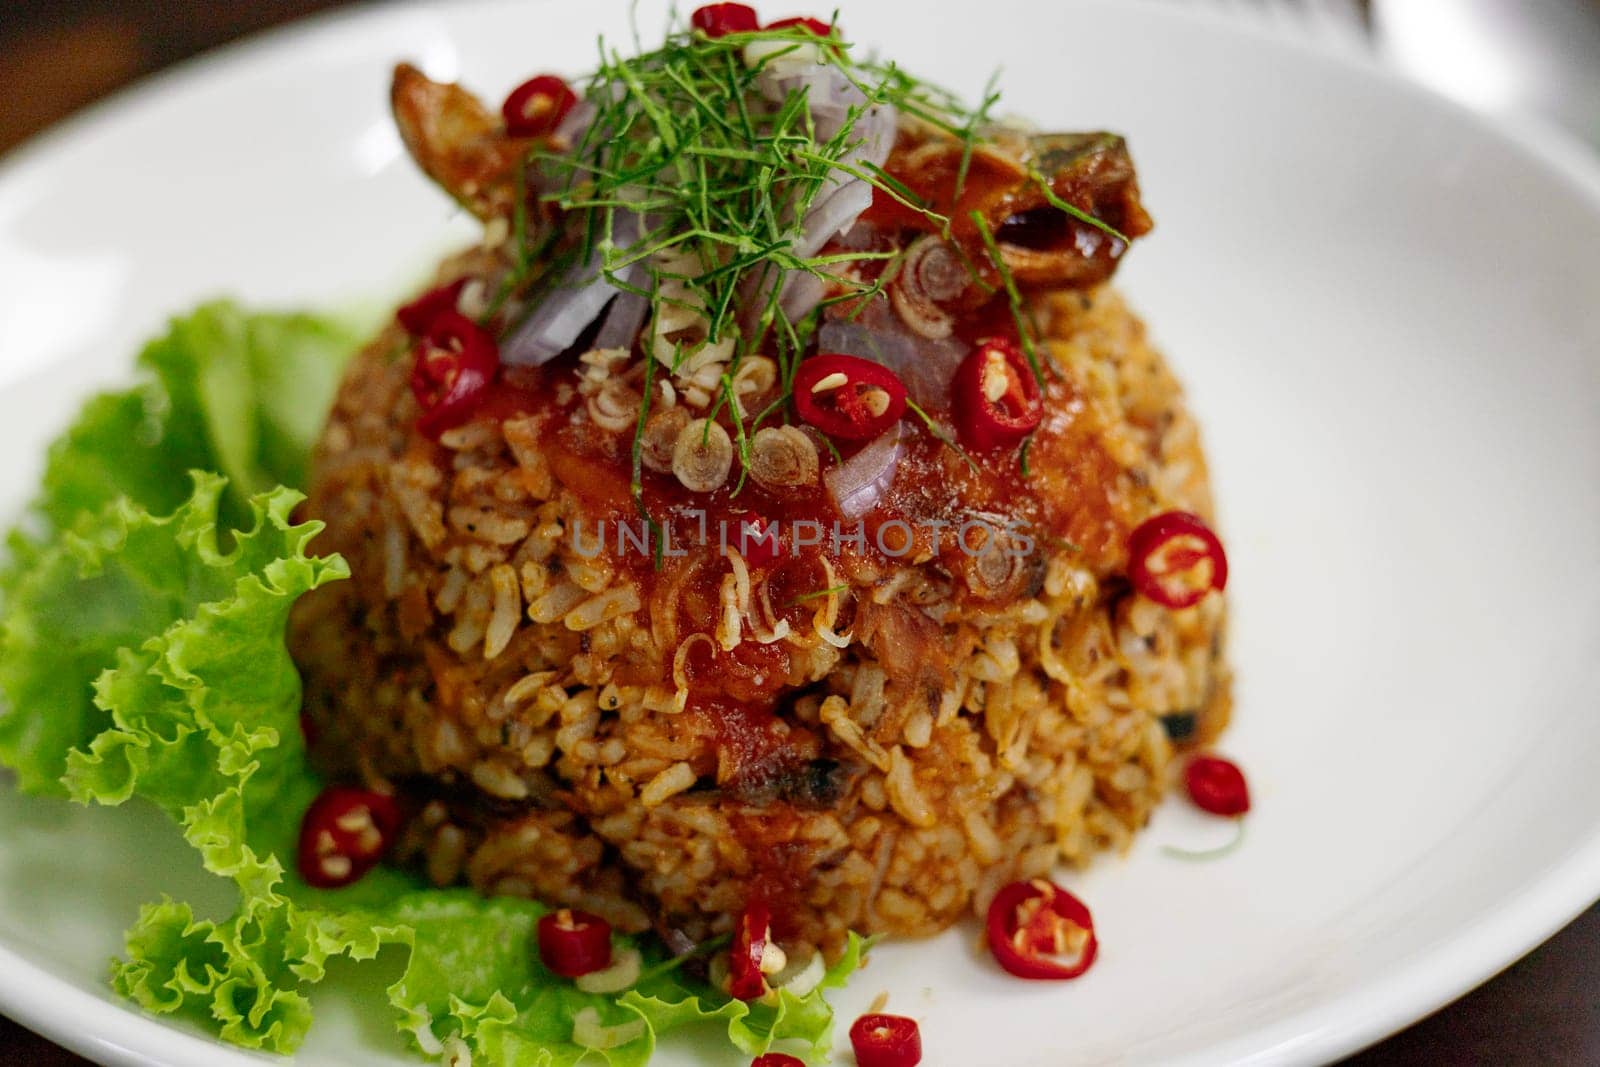 Fried Rice With Spicy Canned Fish In Tomato Sauce by urzine